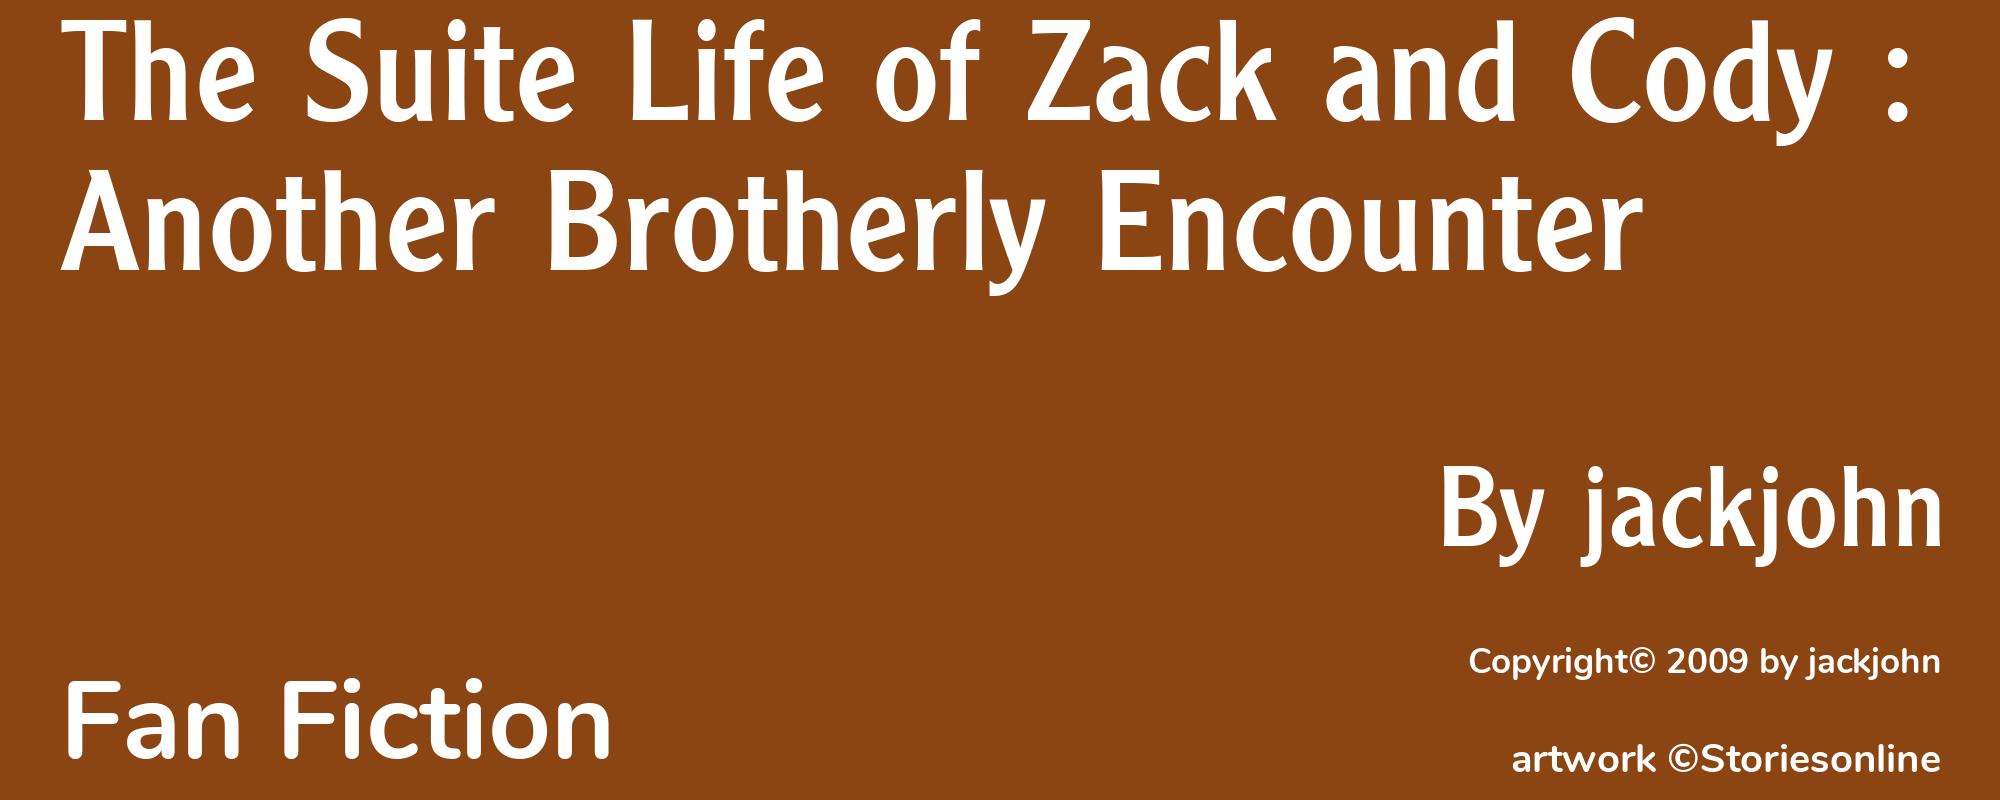 The Suite Life of Zack and Cody : Another Brotherly Encounter - Cover